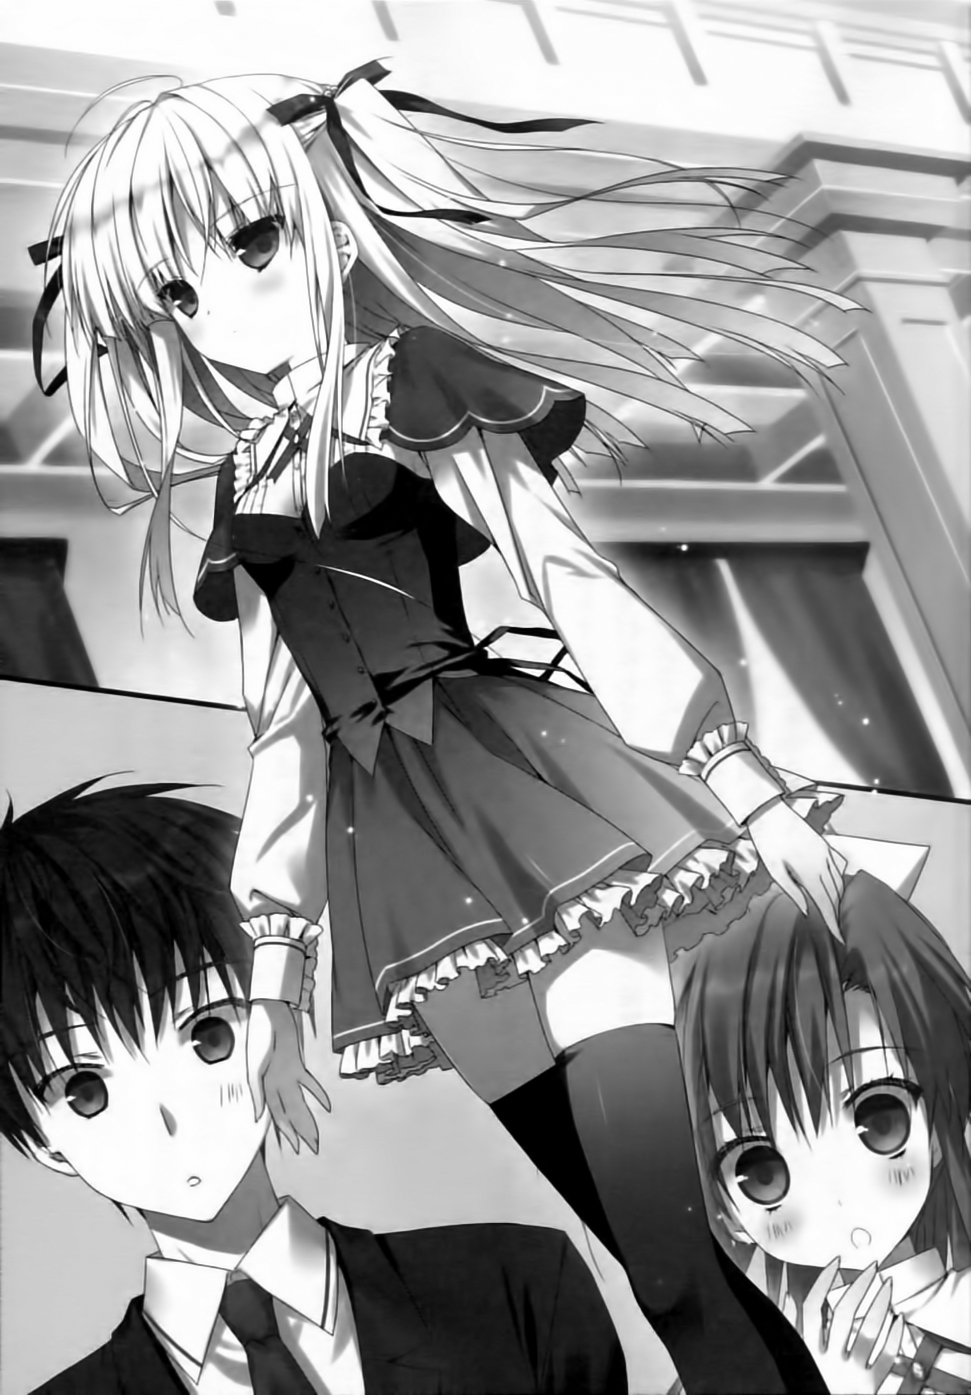 Absolute Duo 1 PDF